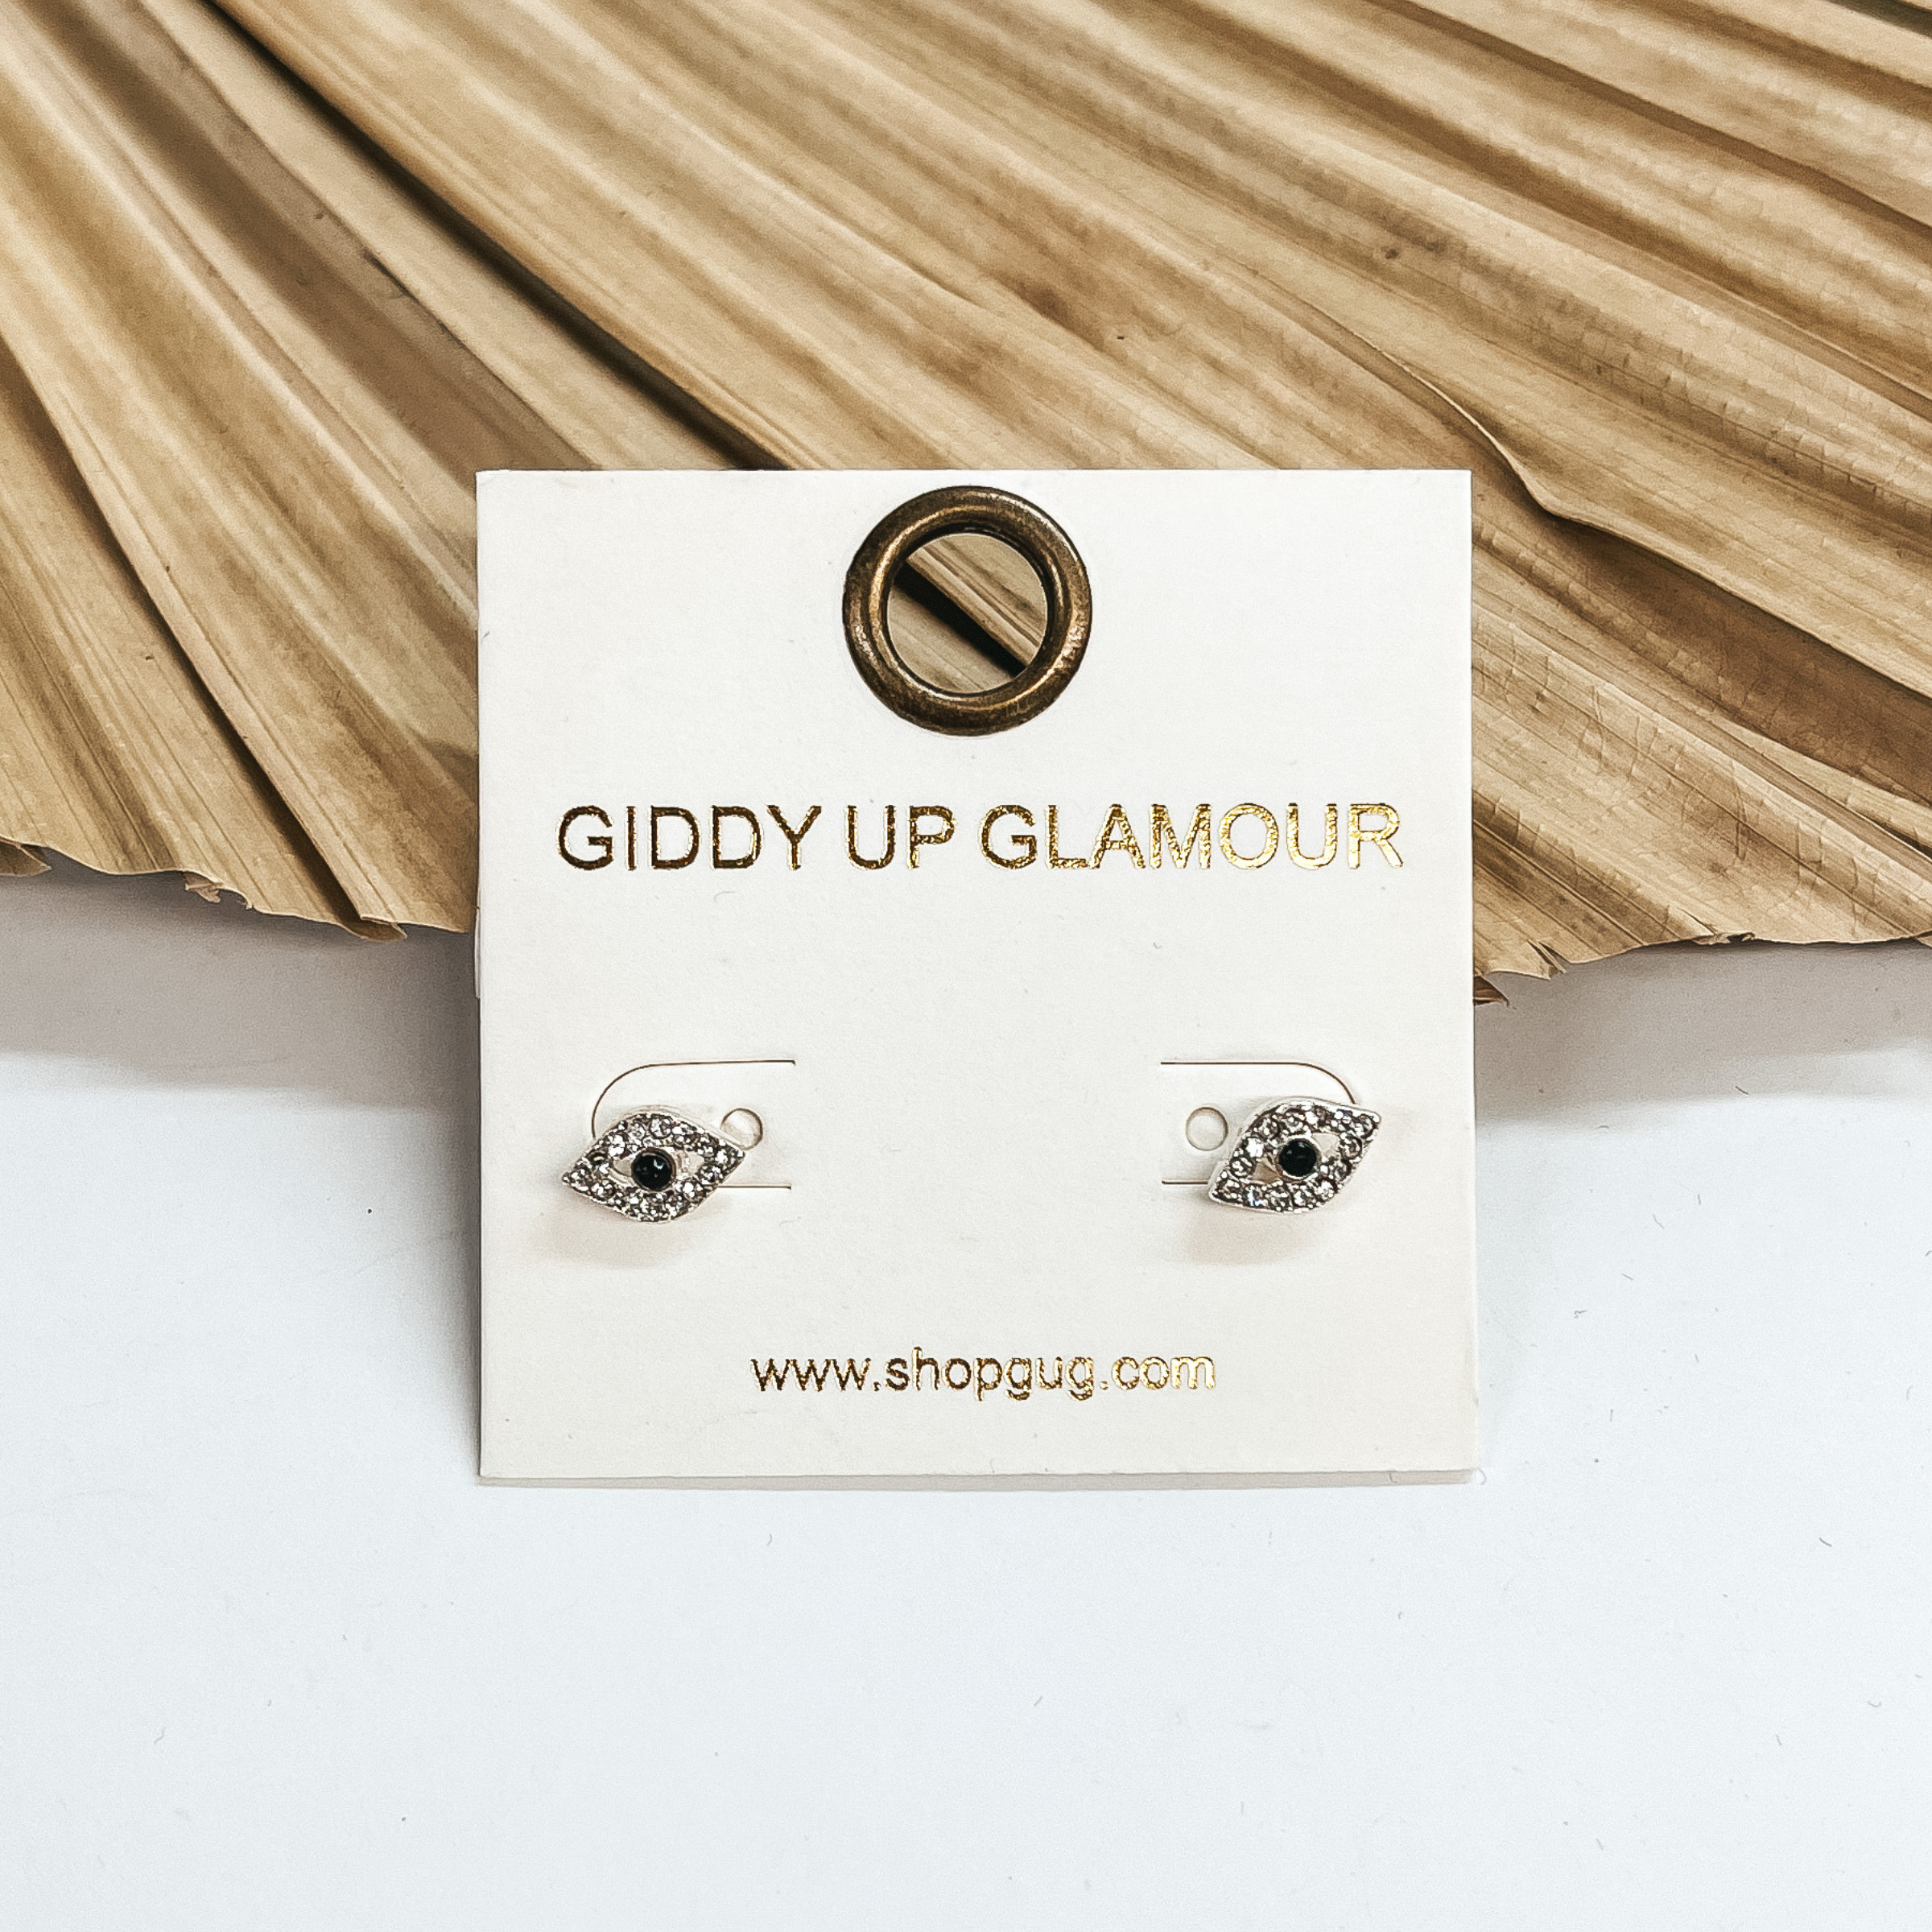 CZ Crystal Evil Eye Studs in Black and Silver Tone - Giddy Up Glamour Boutique